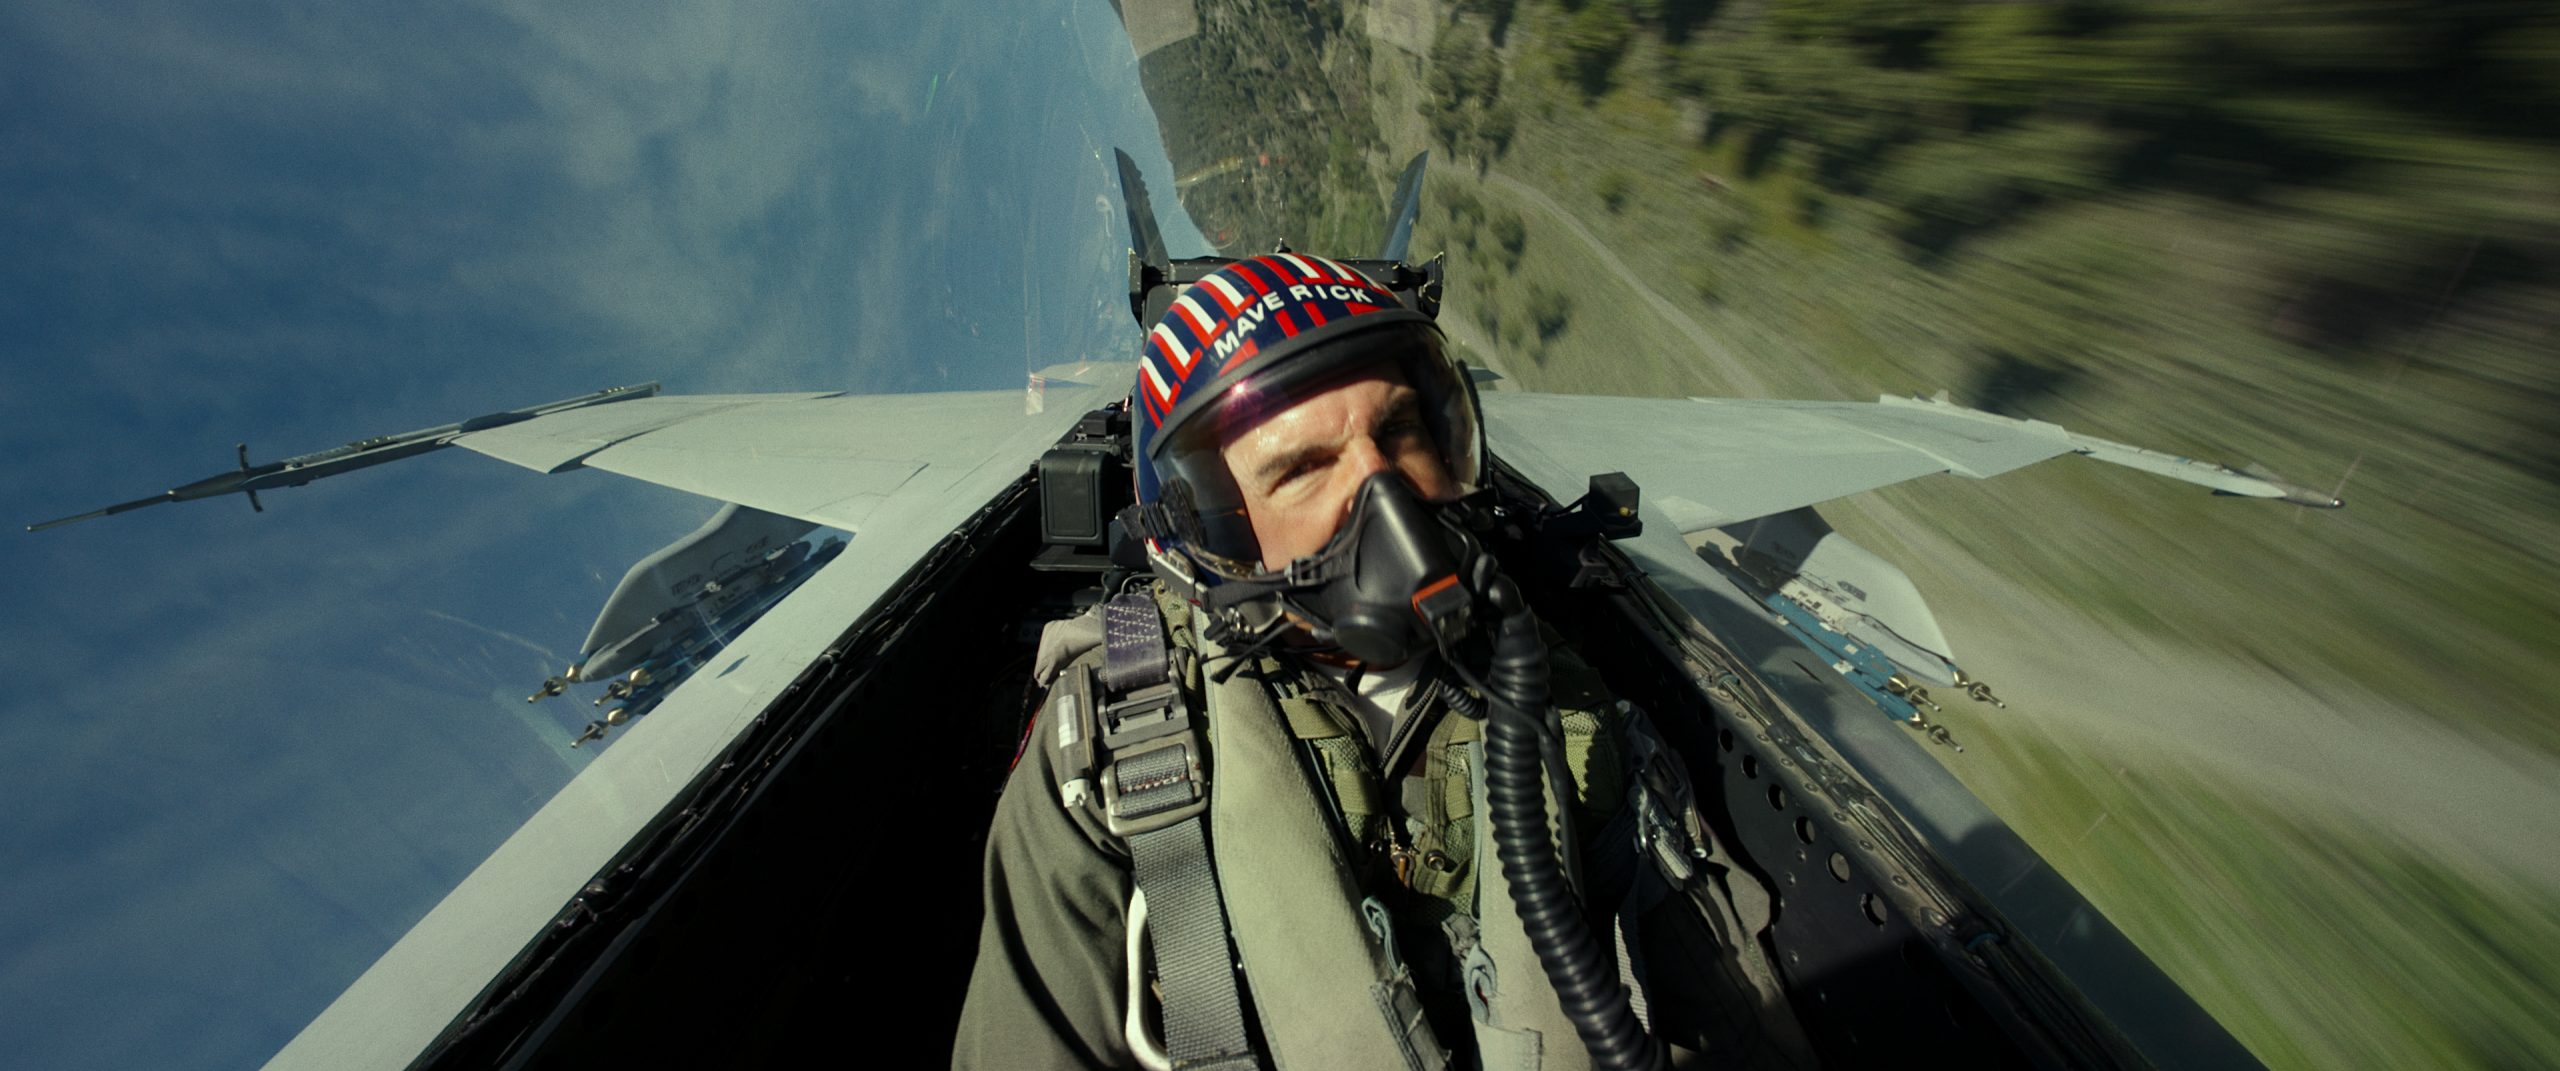 Tom Cruise as Maverick in a F/A-18 Super Hornet (image courtesy of Skydance)